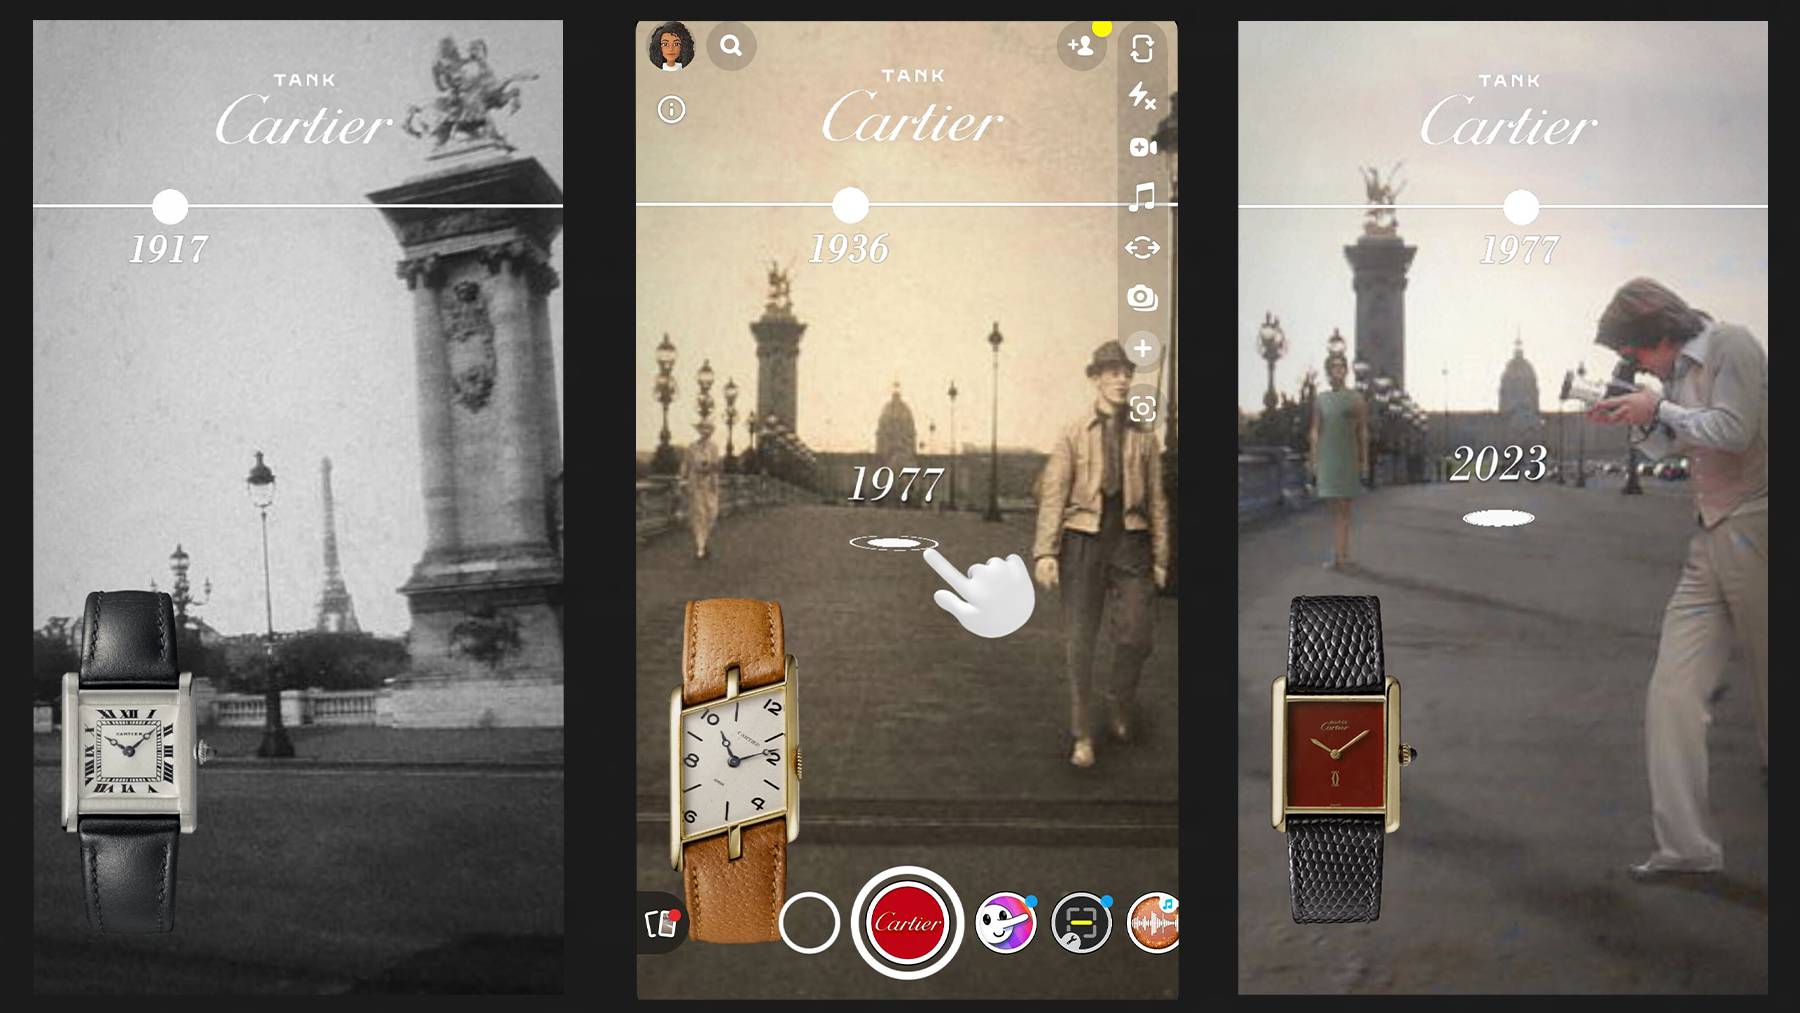 Three panels in the image show Cartier's Snapchat campaign featuring its Tank watch at different points in history.